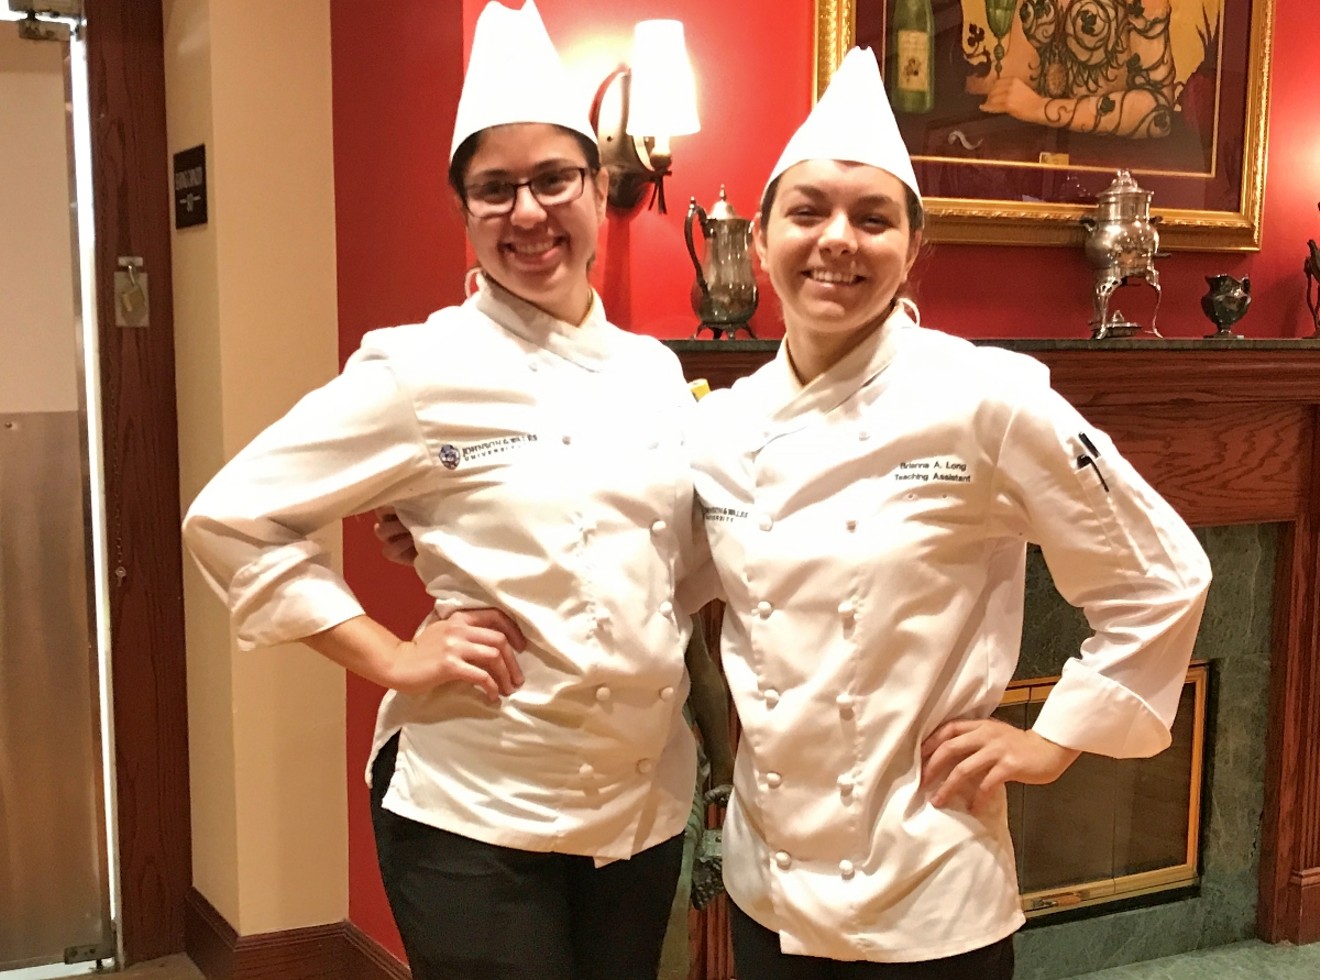 Lyanette Vega-Matos and Brianna Long will compete in Iron Fork's Student Showdown.